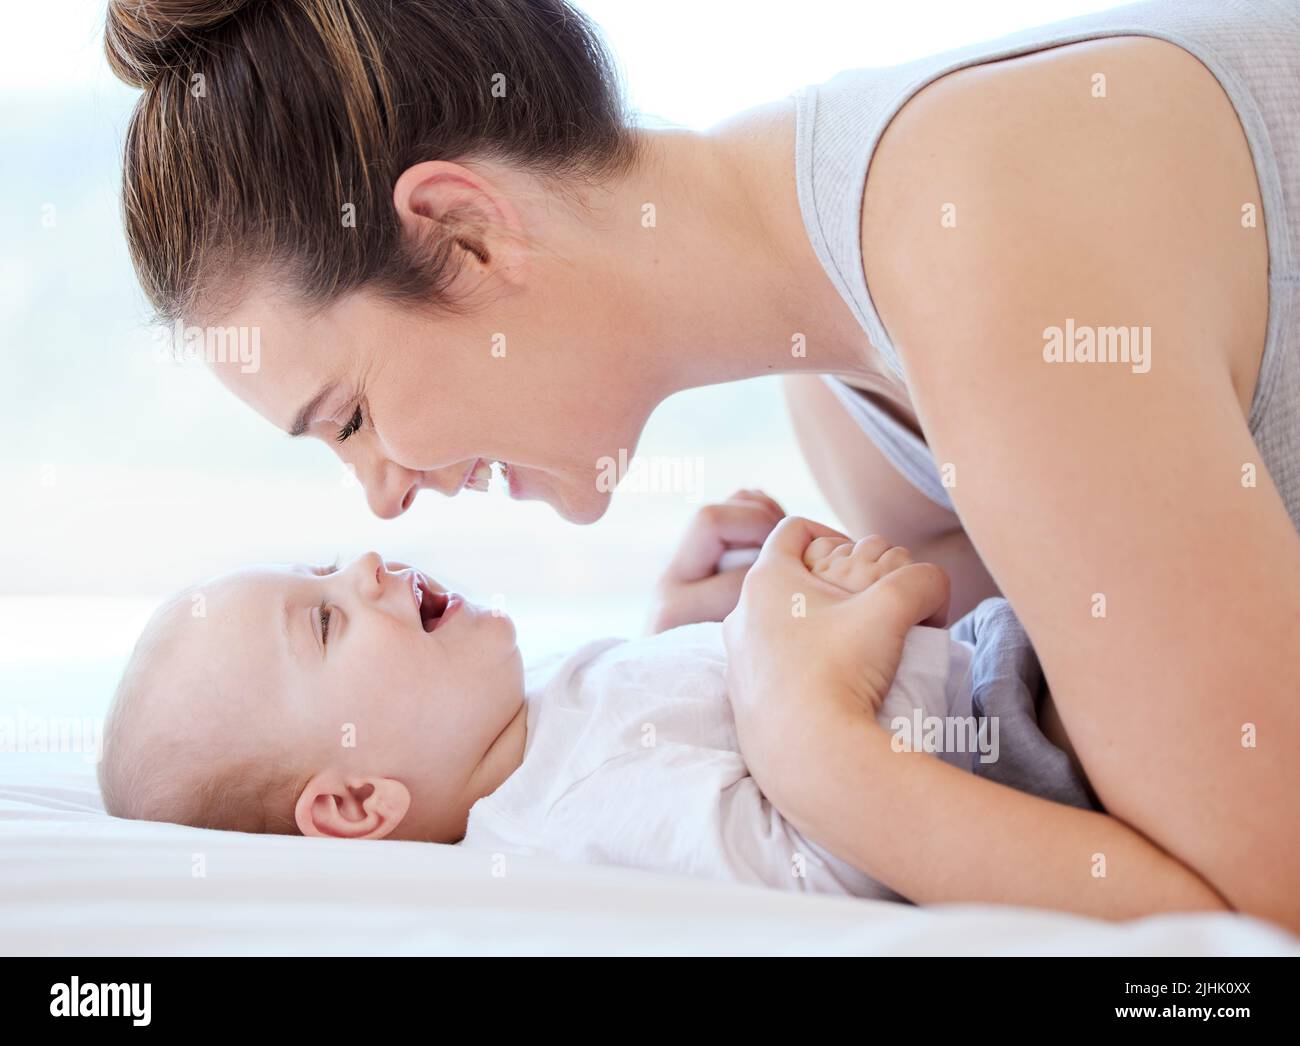 Youre the star that tells me to shine. a young mother bonding with her adorable baby boy at home. Stock Photo